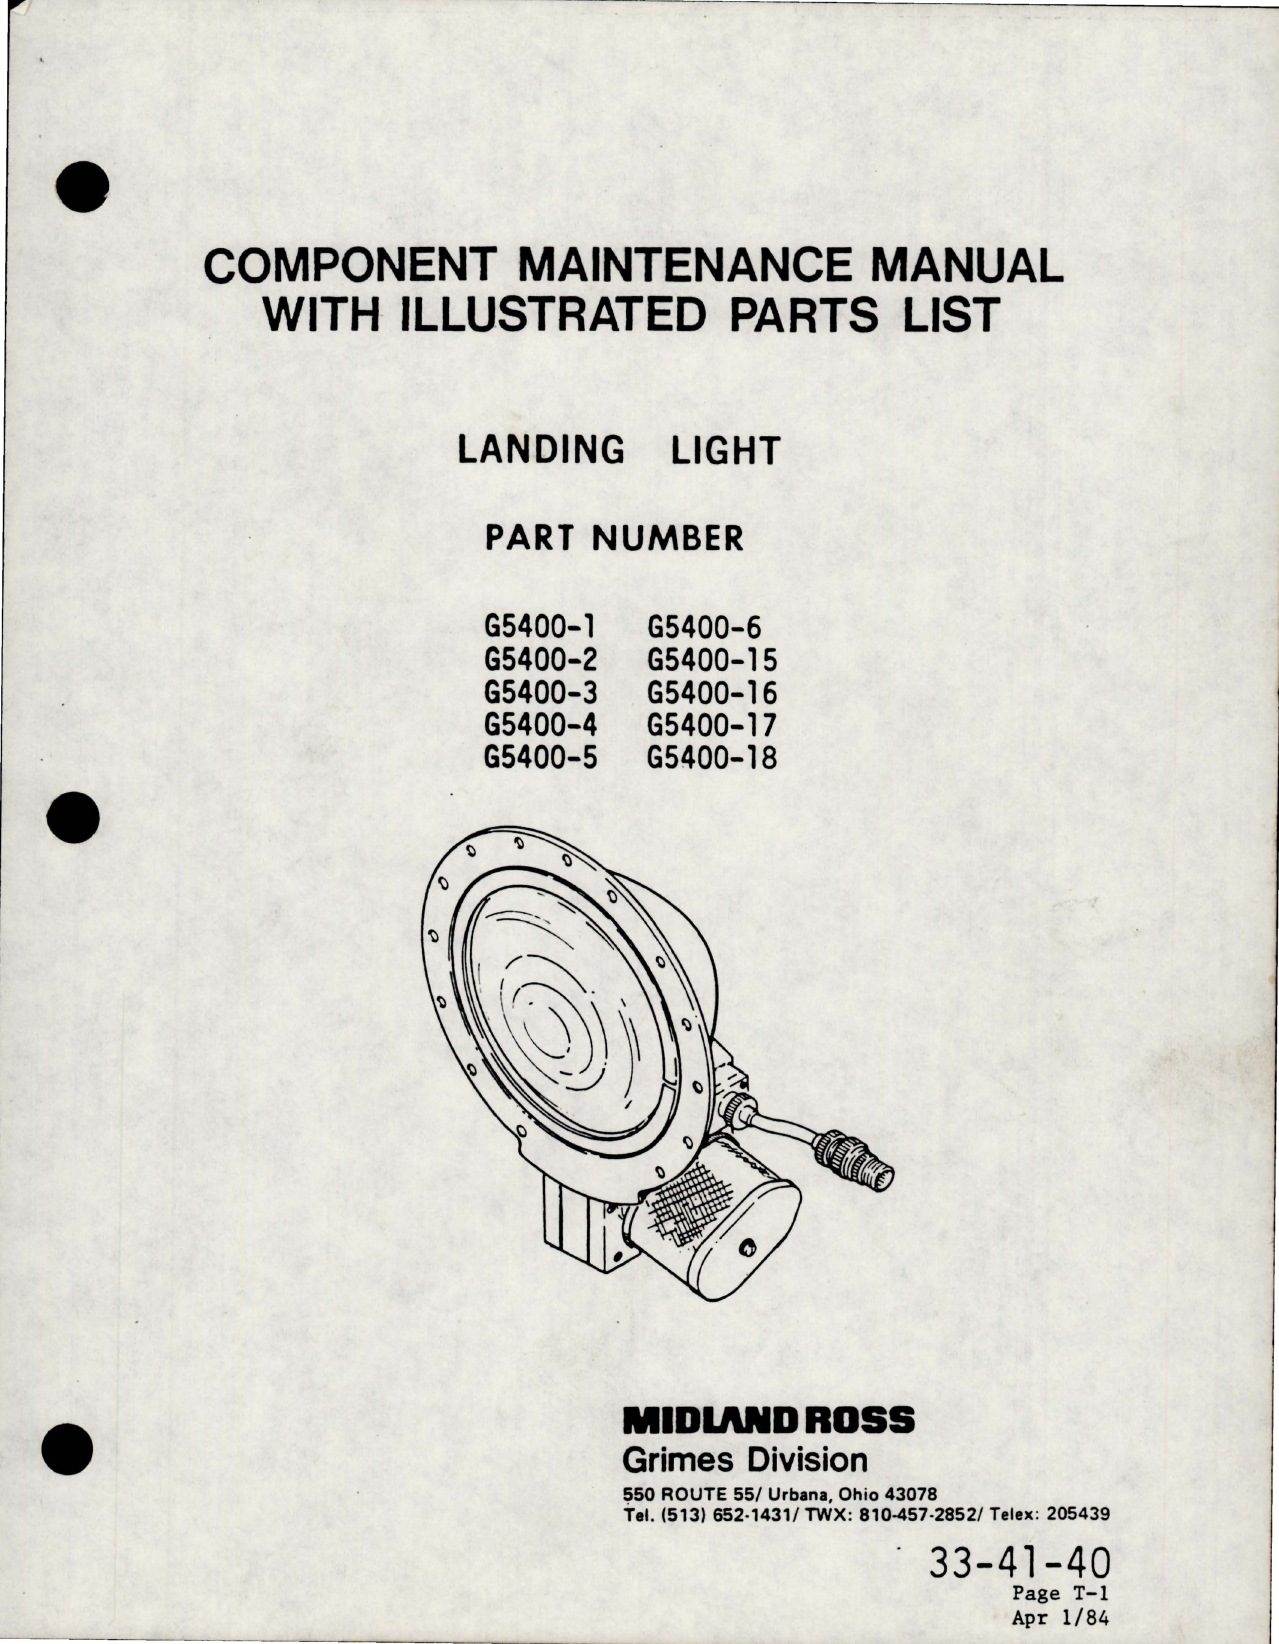 Sample page 1 from AirCorps Library document: Maintenance Manual for Landing Light - Part G5400 Series 